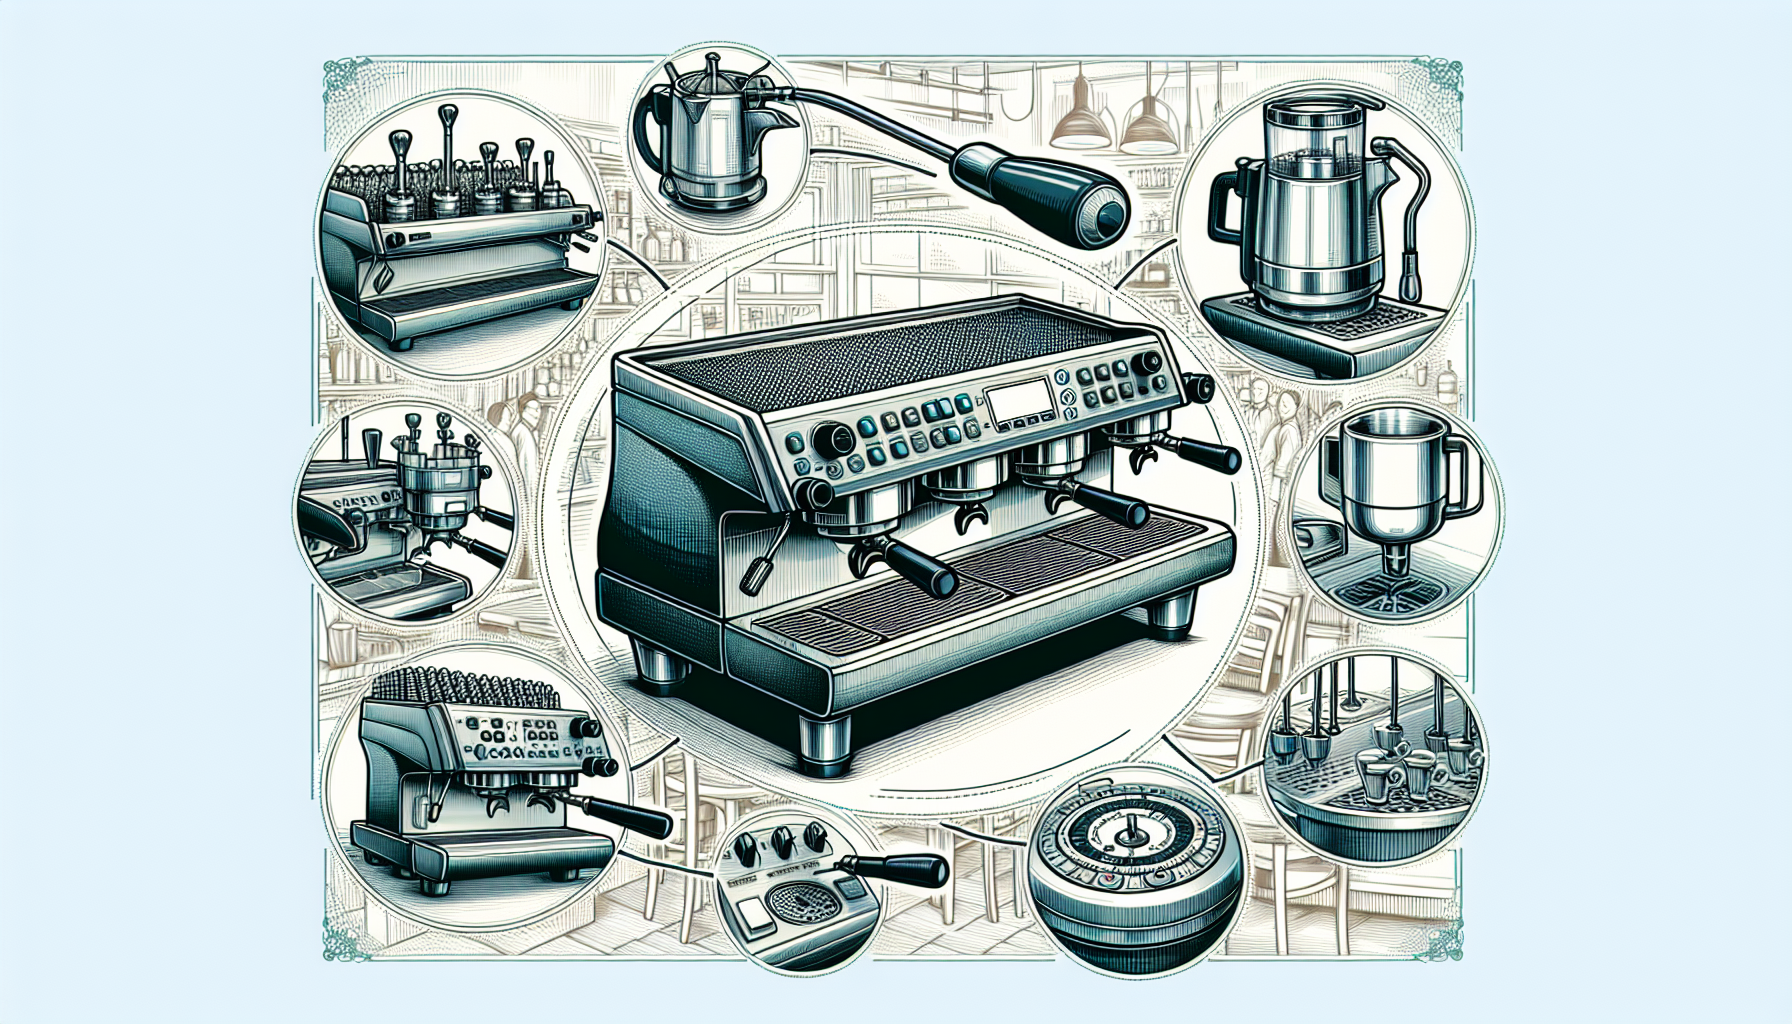 Factors to consider when selecting a commercial espresso machine